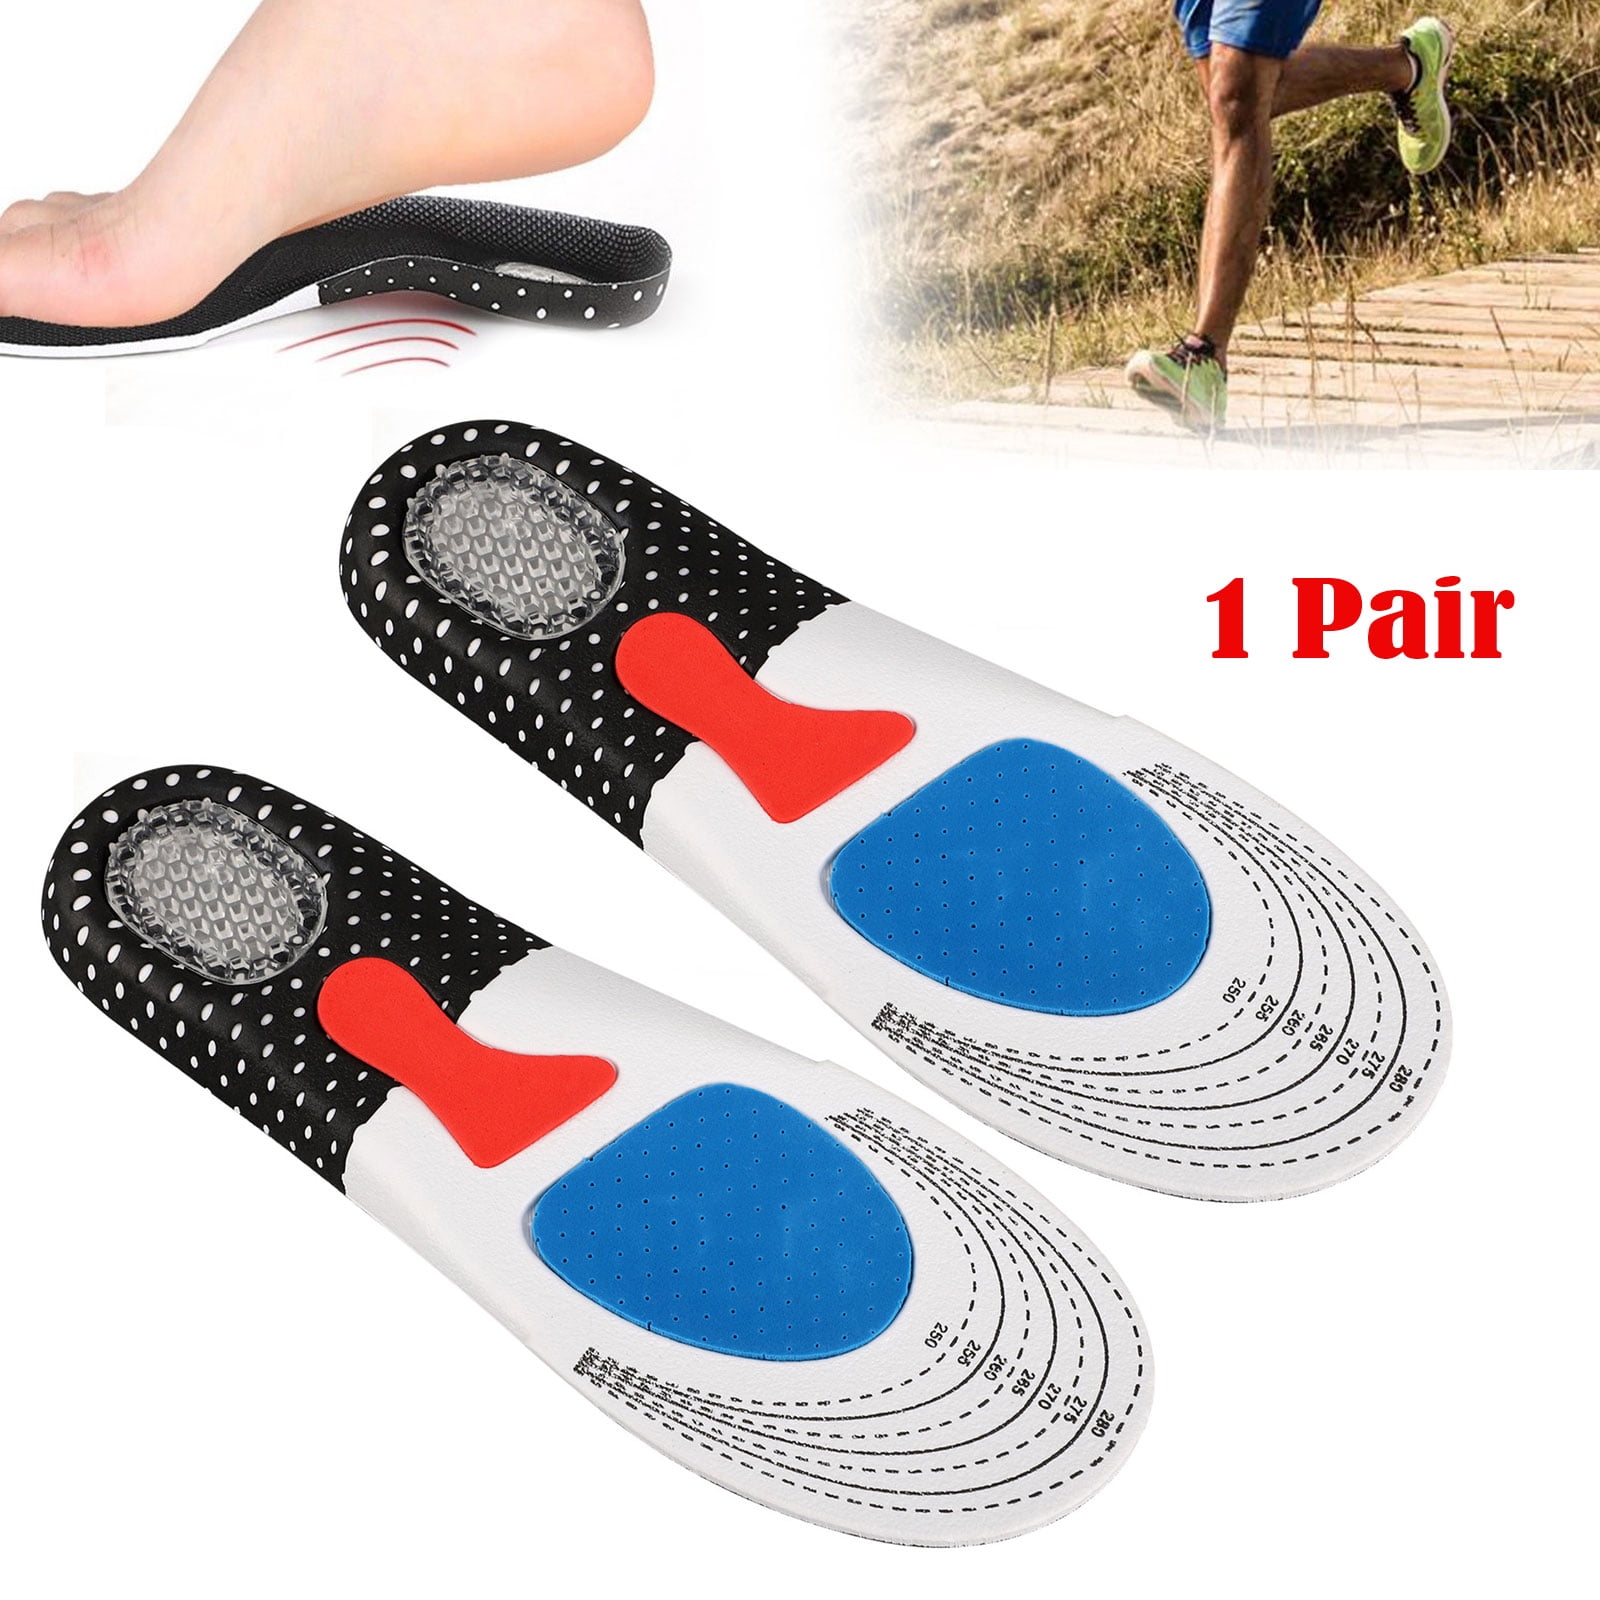 Arch Support Inserts Orthotic Shoe Insoles for Plantar Fasciitis & Pain Relief 